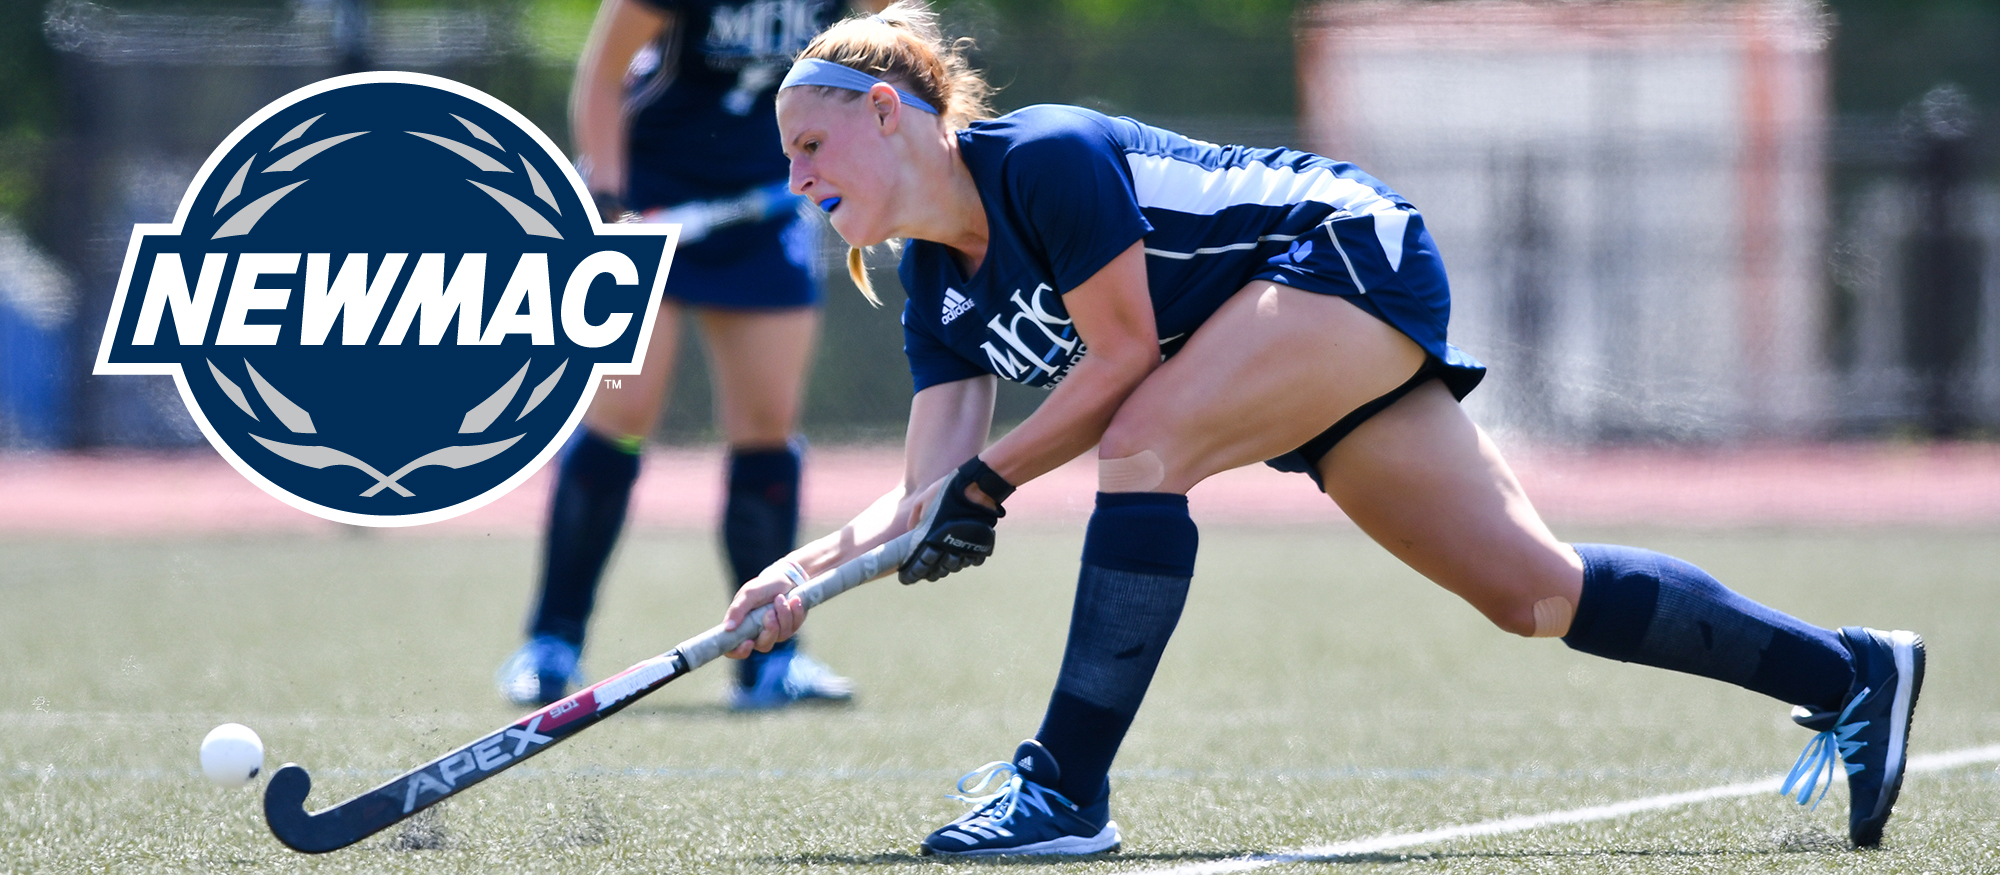 Montigny Collects NEWMAC Field Hockey Defensive Athlete of the Week Honors